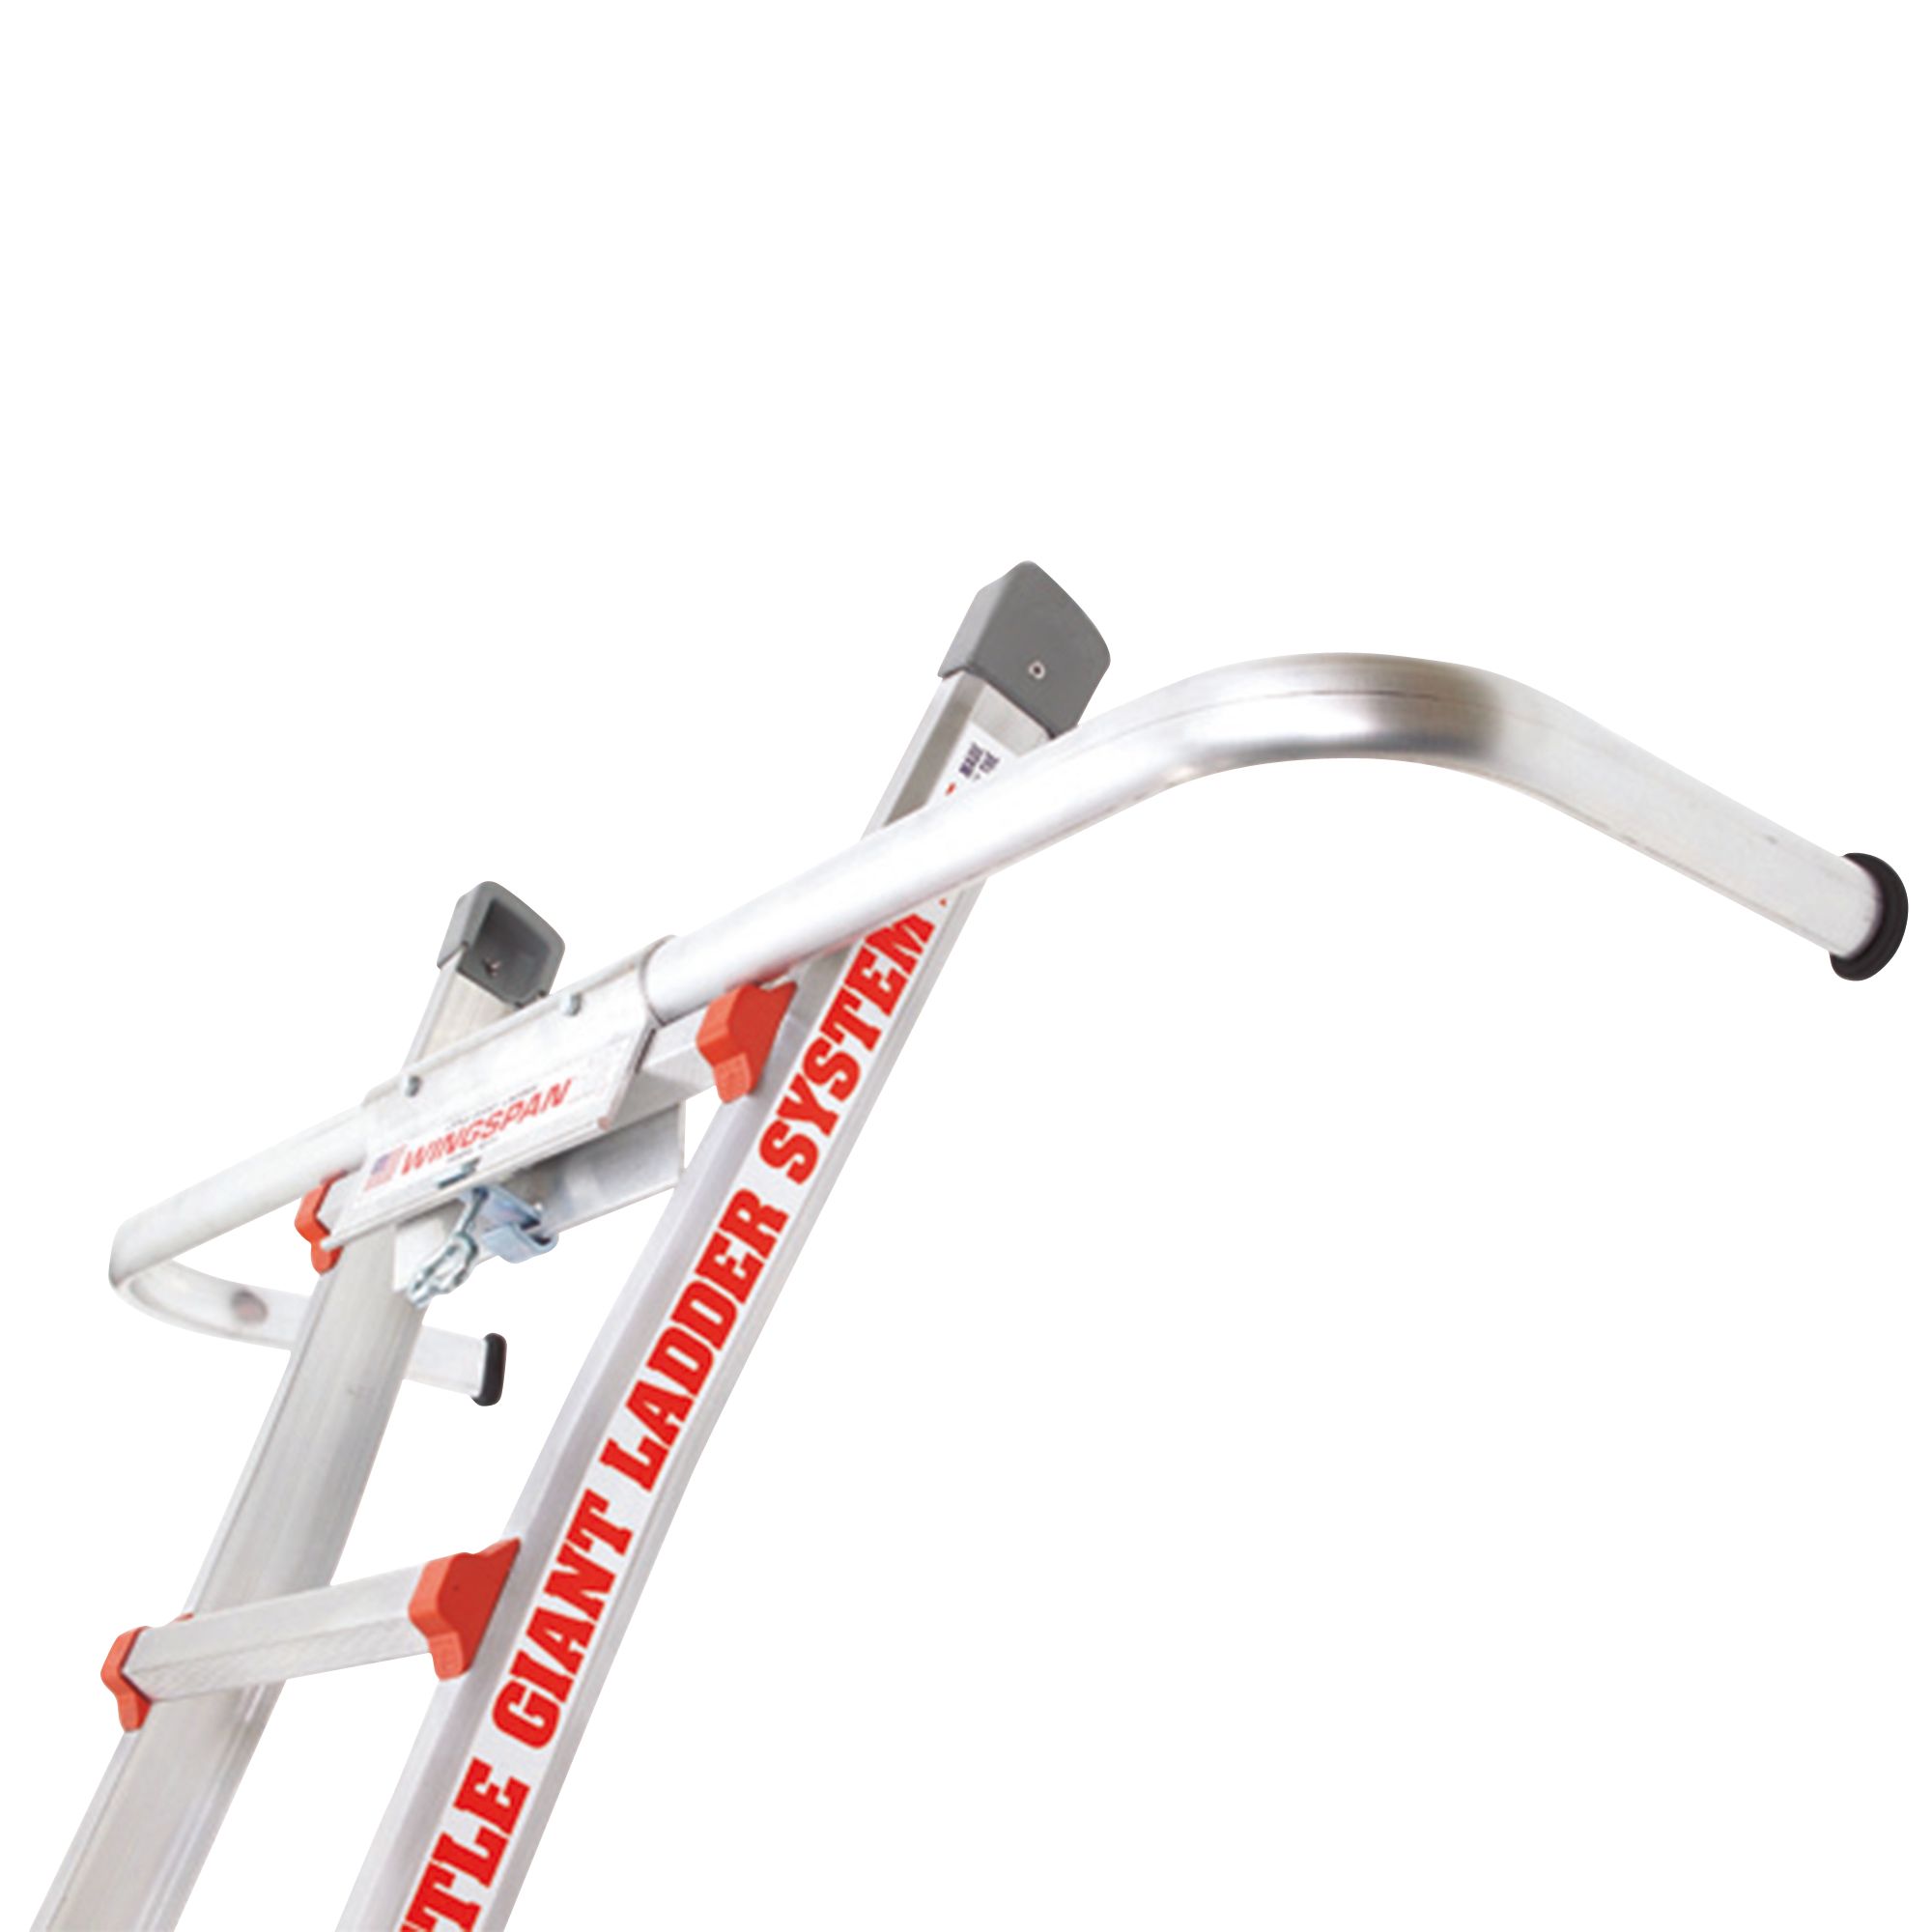 Image of Tb Davies Little Giant Aluminium Wing Span Stand Off Accessory